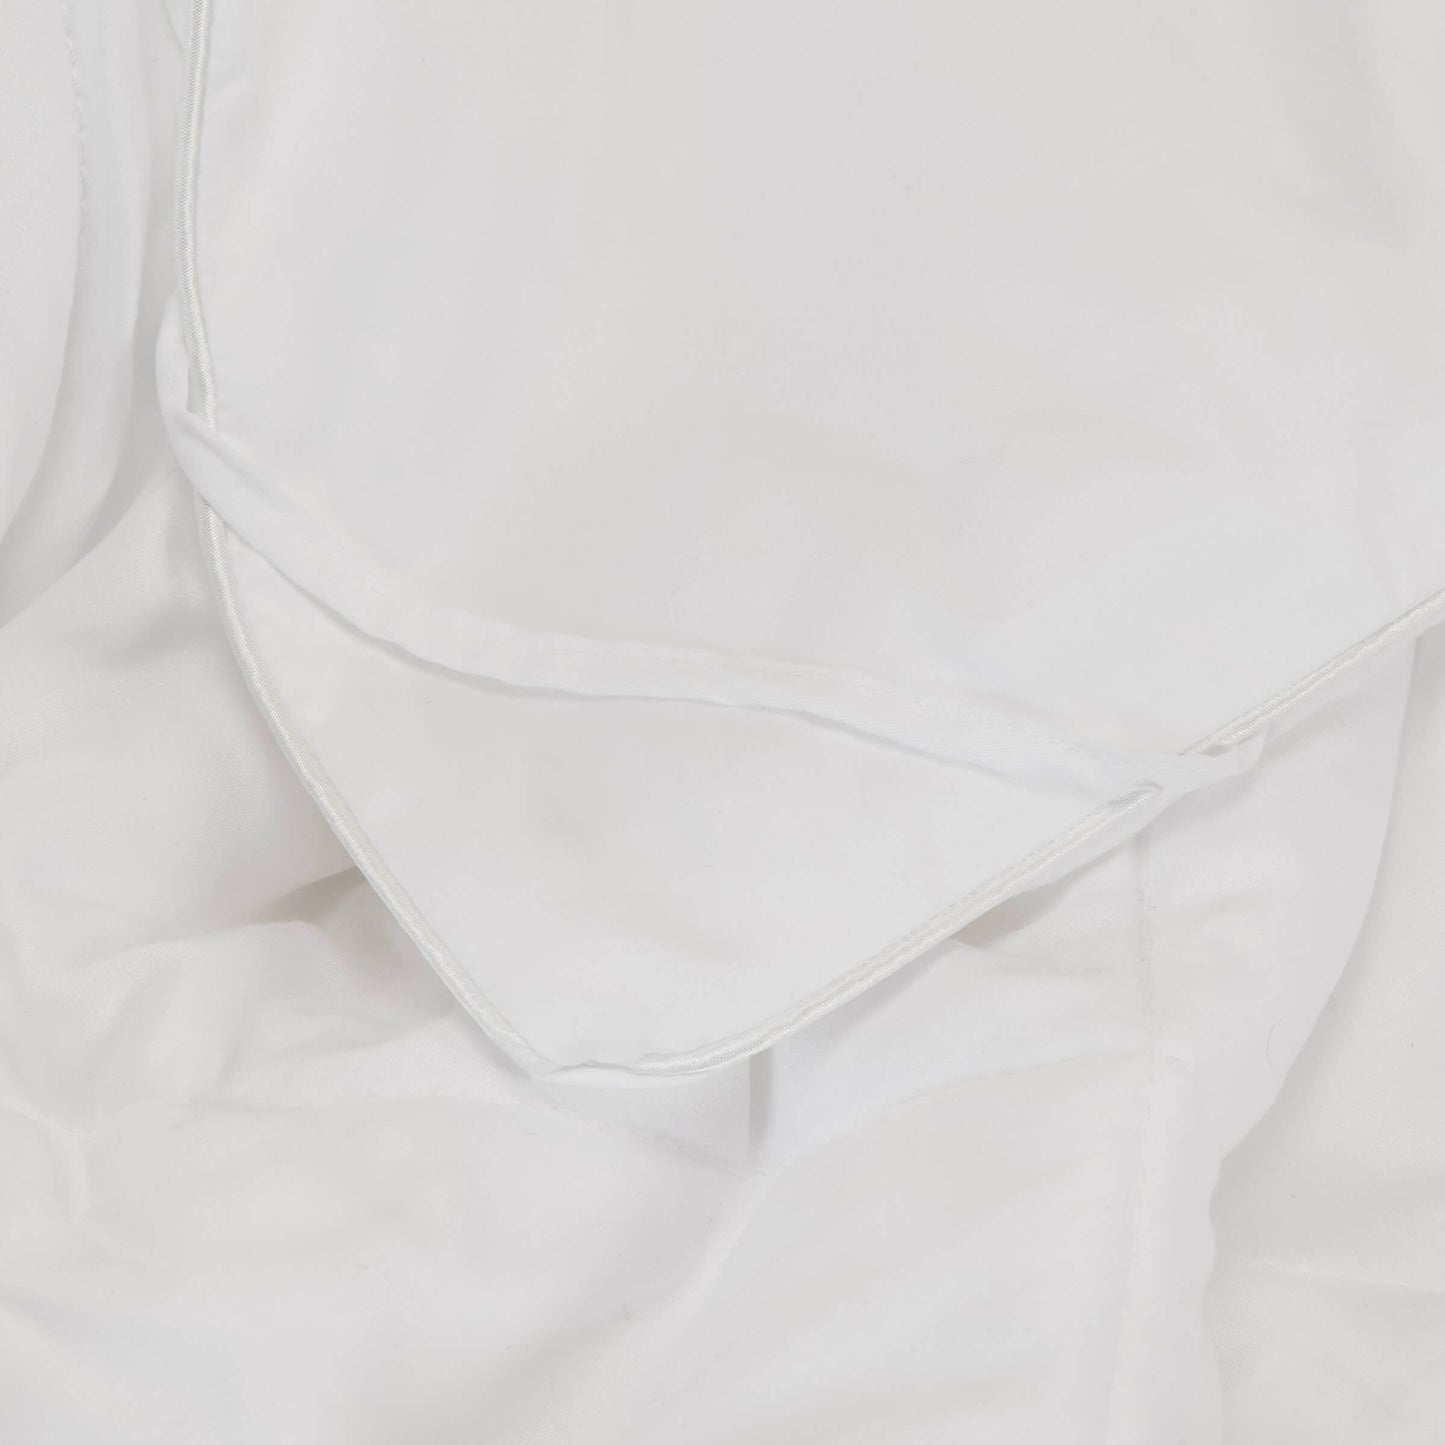 A detailed close up of the Slumber Cloud Comforter showing the corner loops